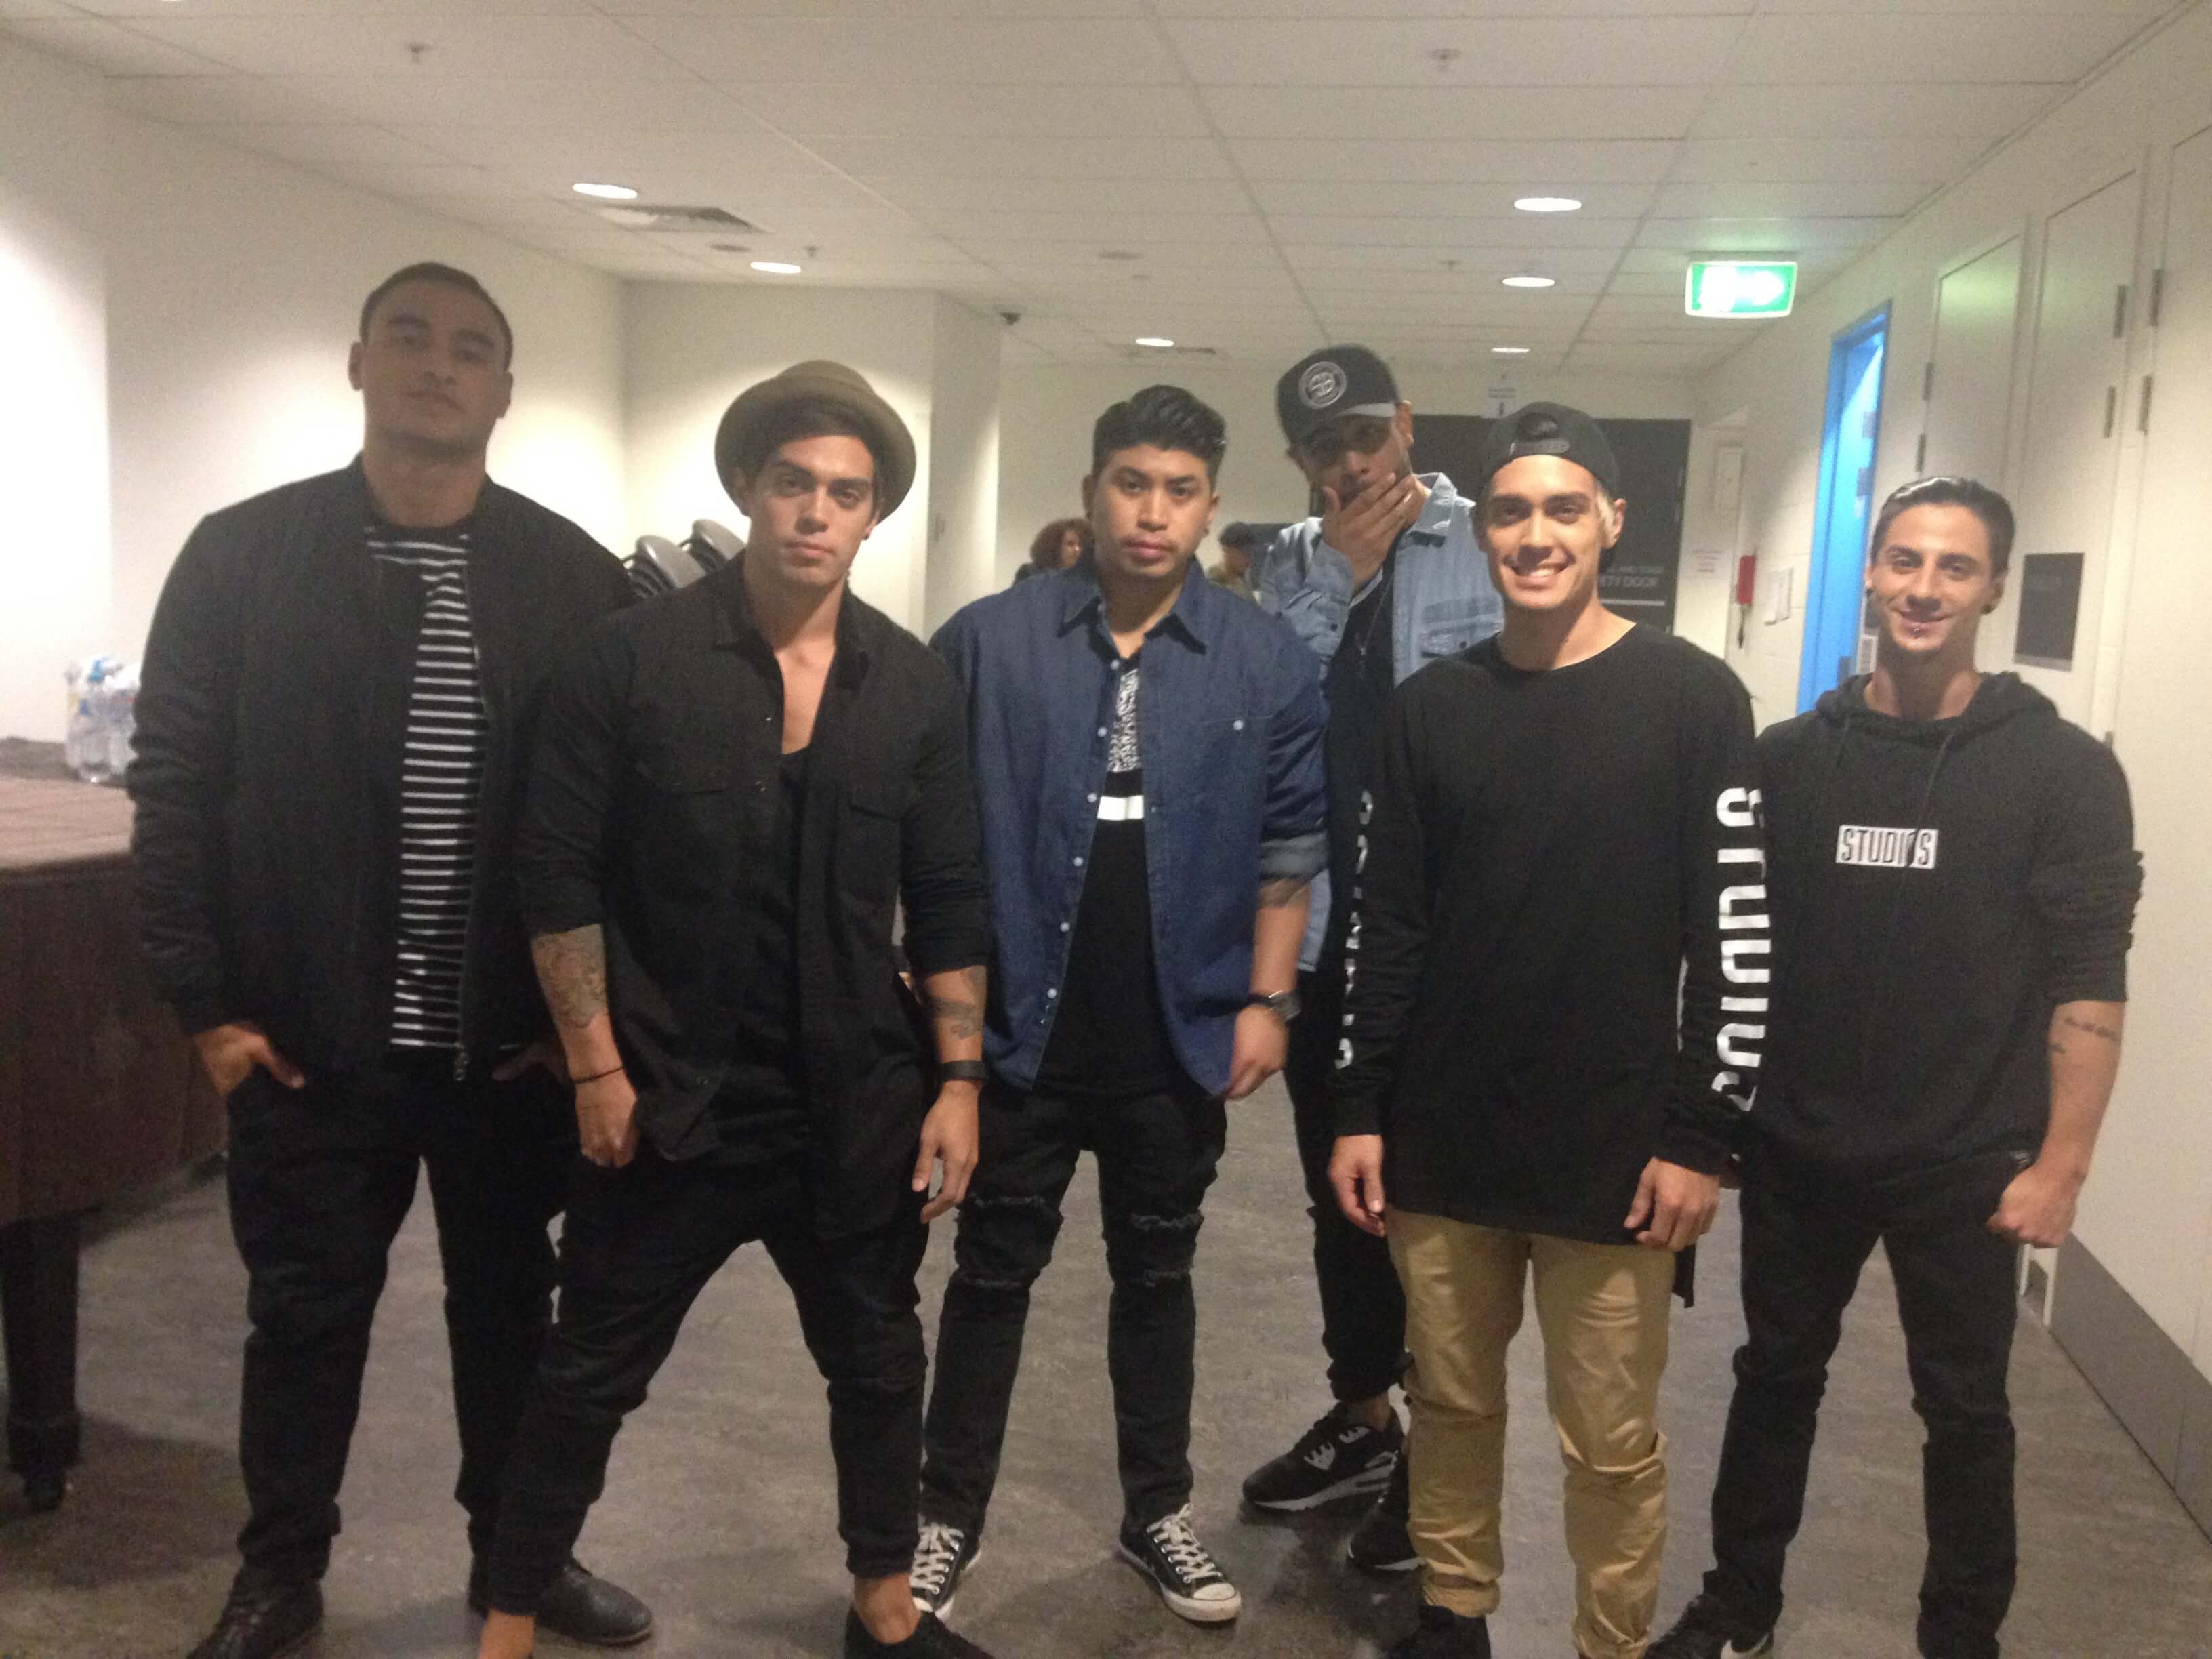 Photo of Justice Crew from Sony Music